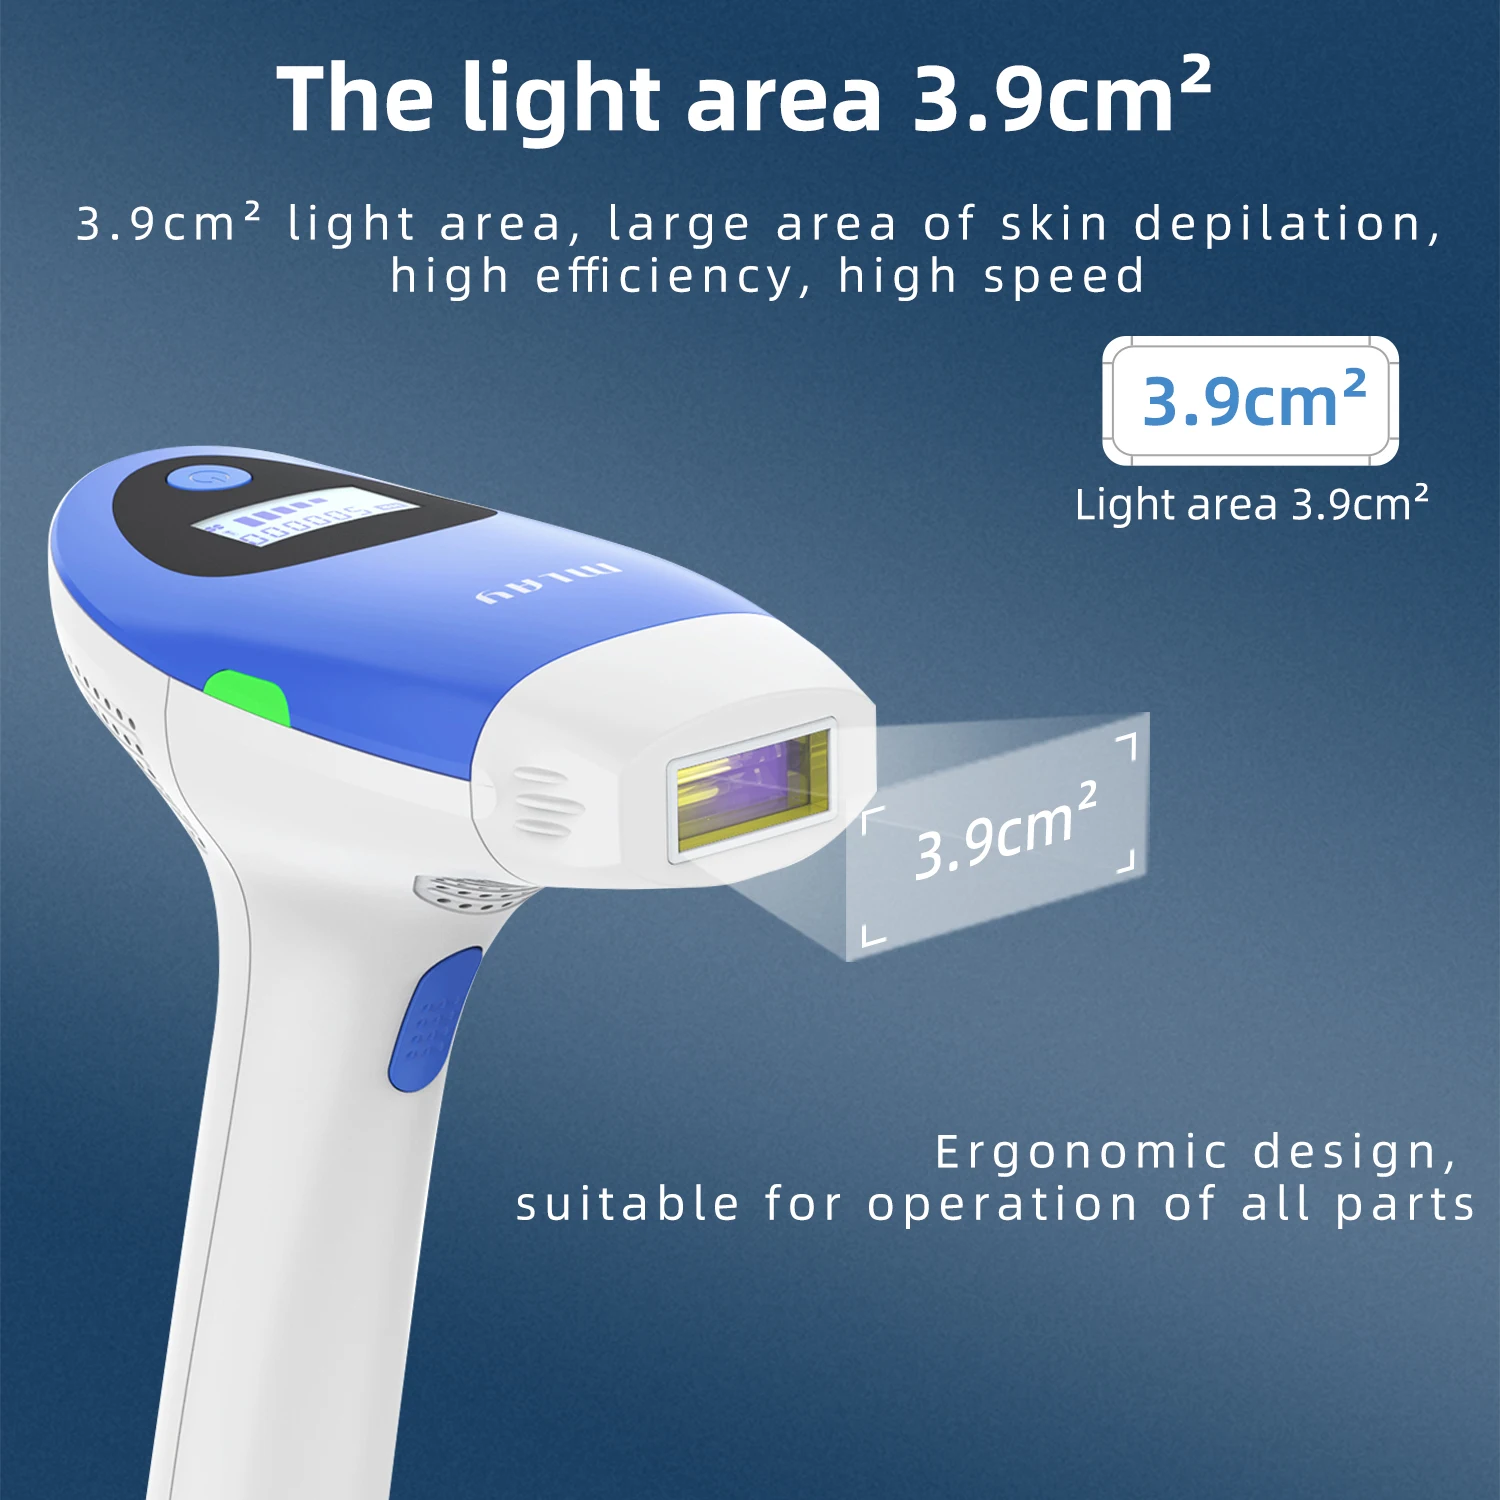 Mlay Portable 3-in-1 IPL Laser Device Automatic 500000 Shots for Home Use for Skin Rejuvenation and Acne Treatment